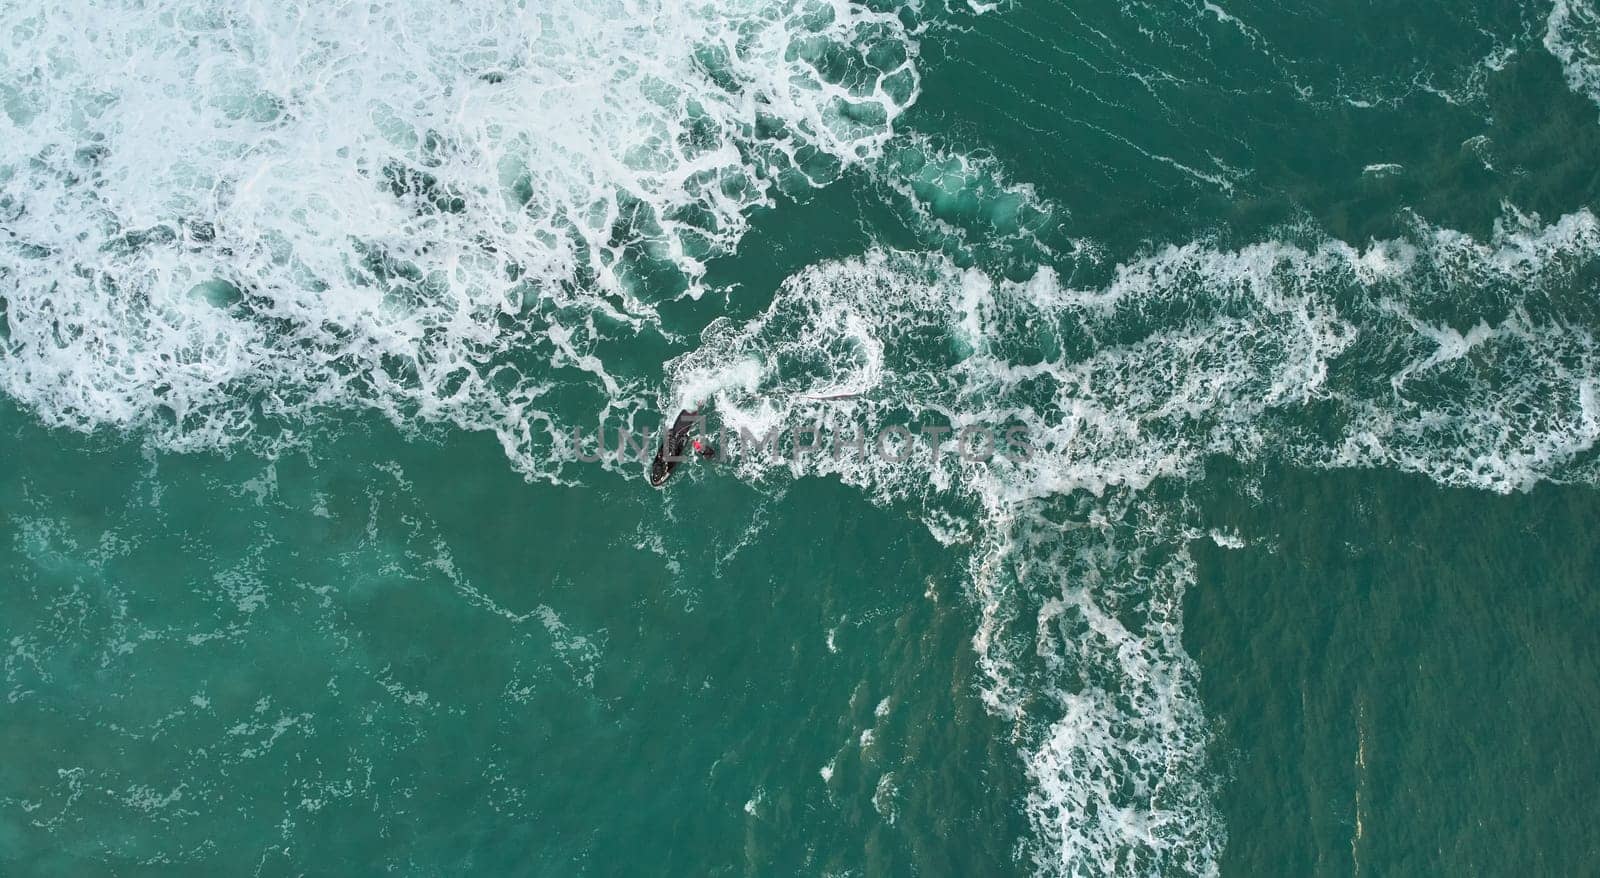 Aerial shot of surfer enjoying wind waves in the ocean by driver-s